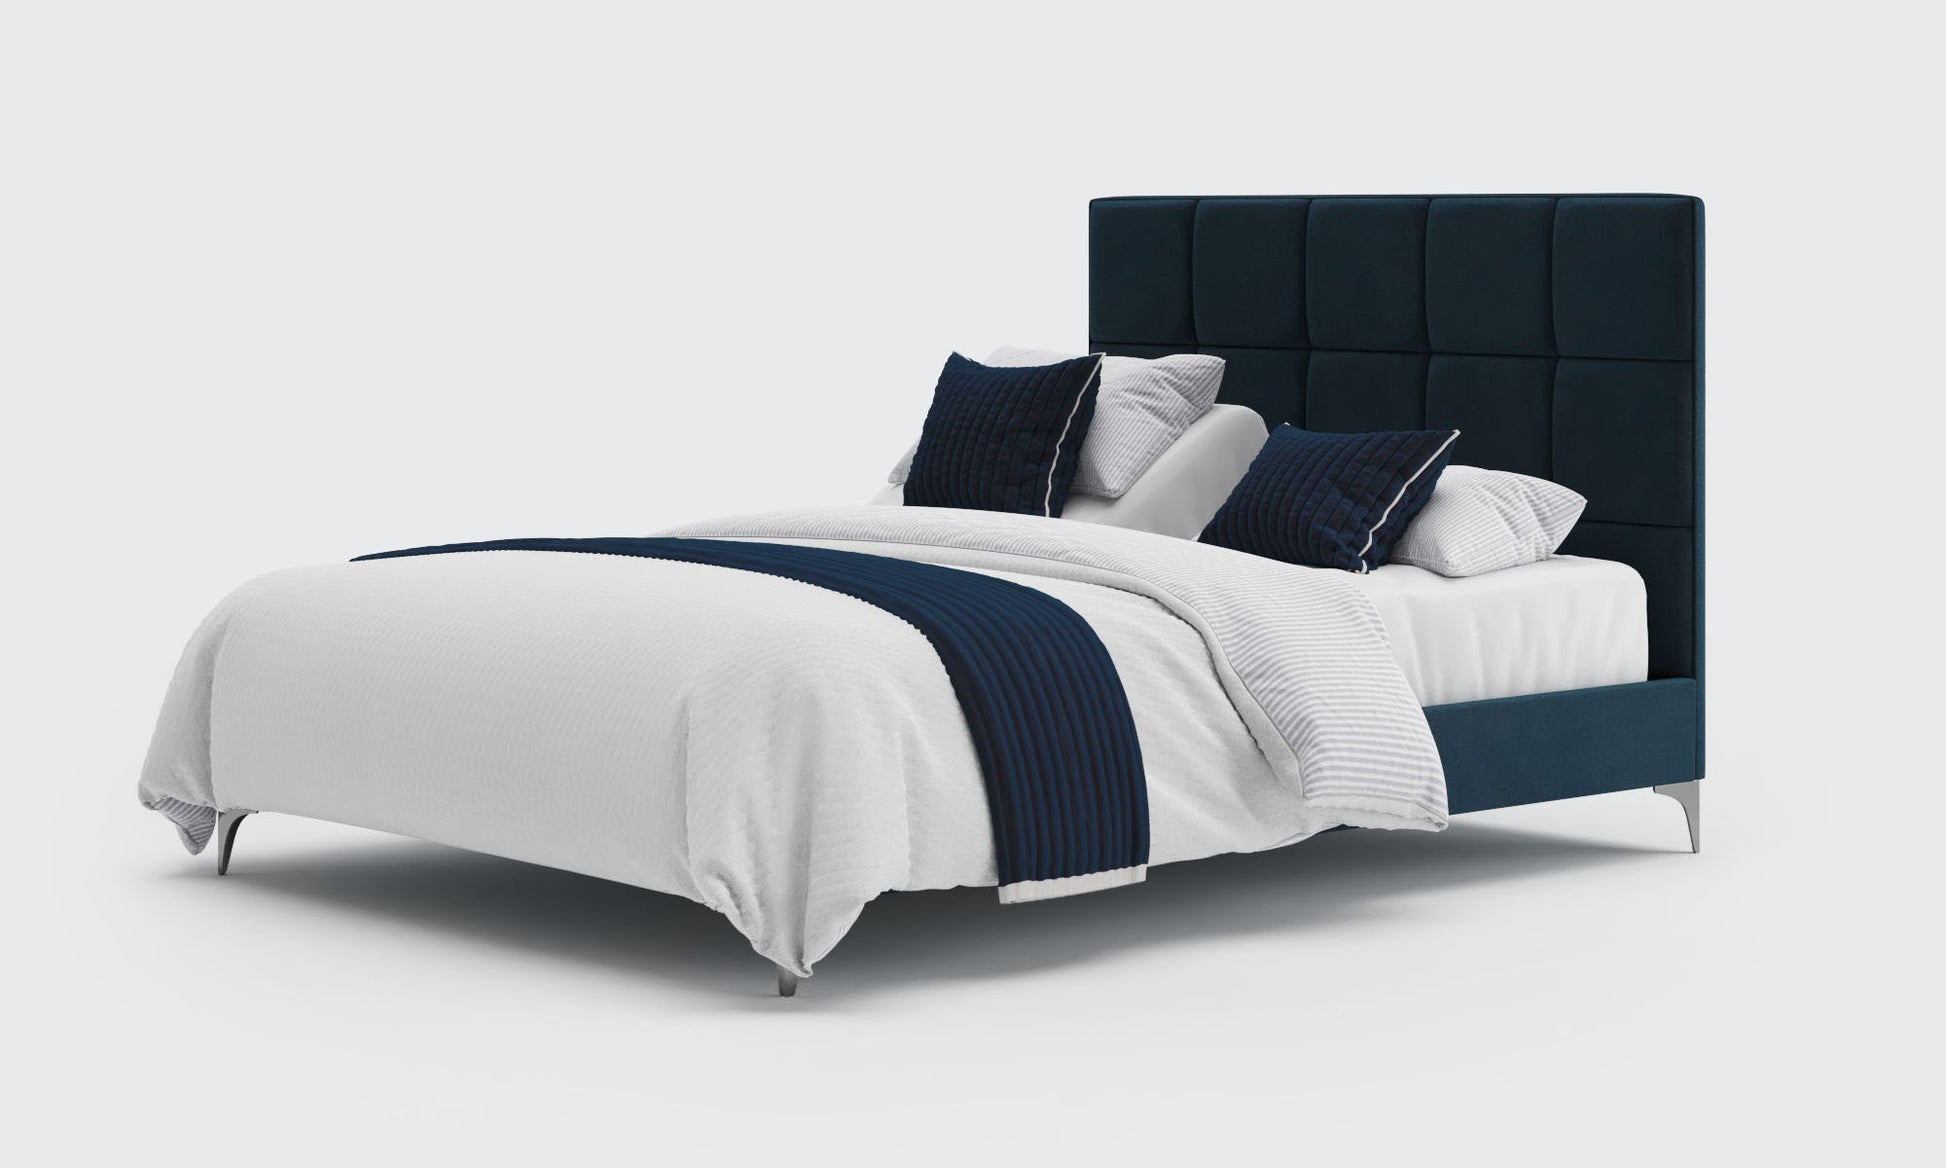 borg 5ft king dual bed and mattress in the royal velvet material